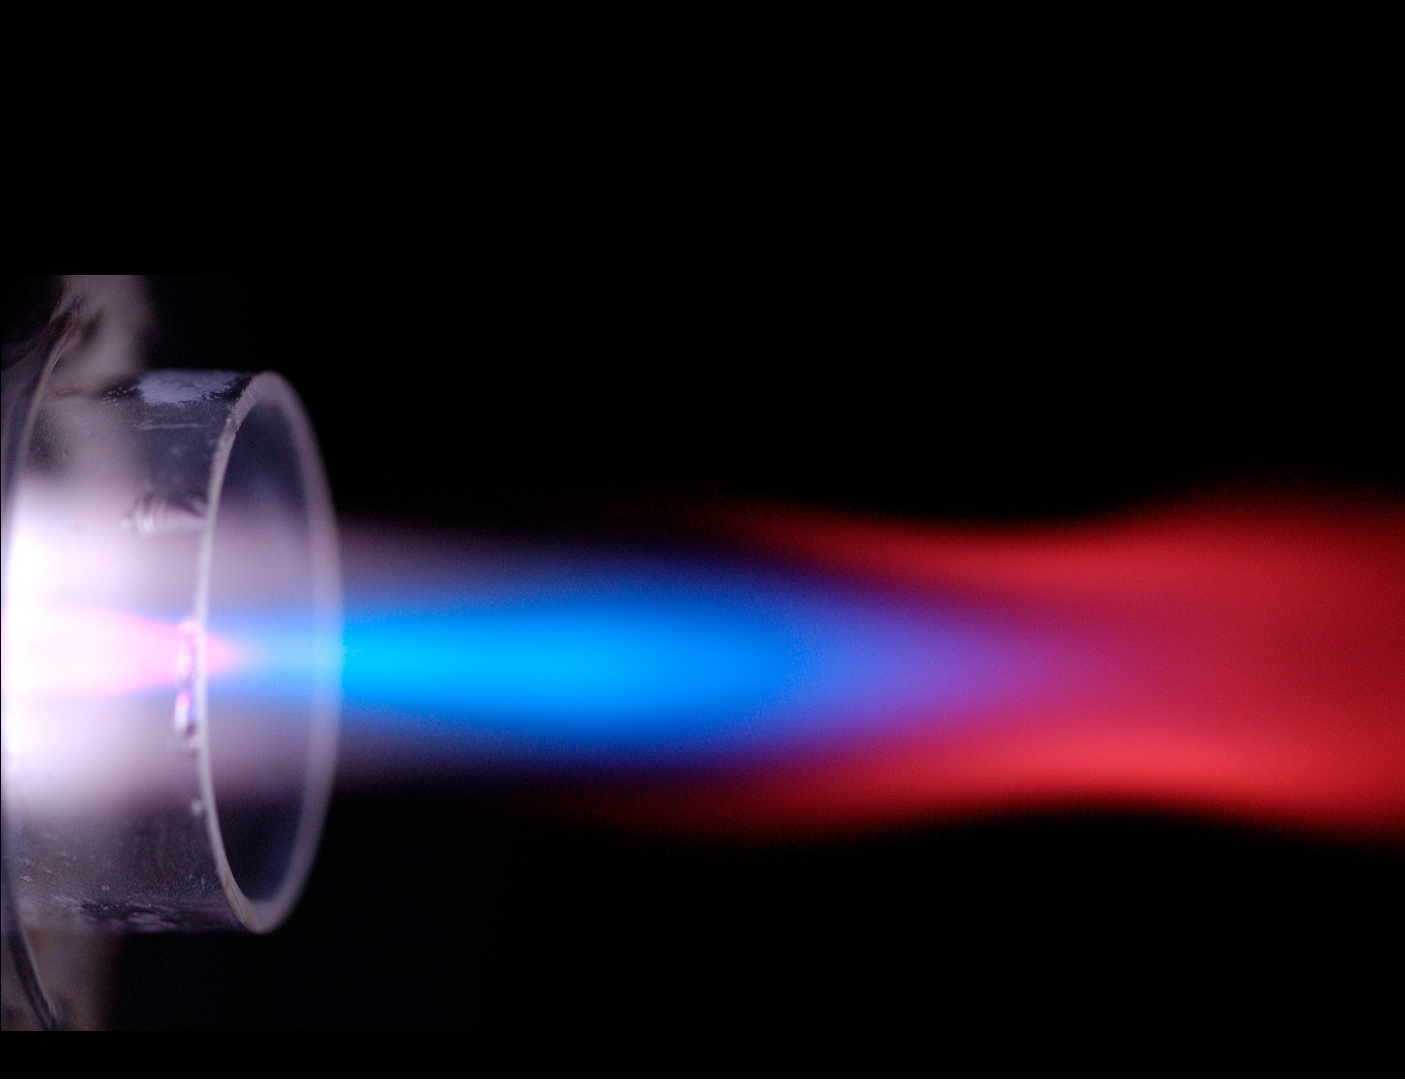 Plasma flows from left to right, containing a sample of yttrium nitrate. The red colored regions are emission from YO molecules and the blue region is from Y+ ions. In ICP-MS, the sampler cone tip would be just to the right of the end of the first red region.